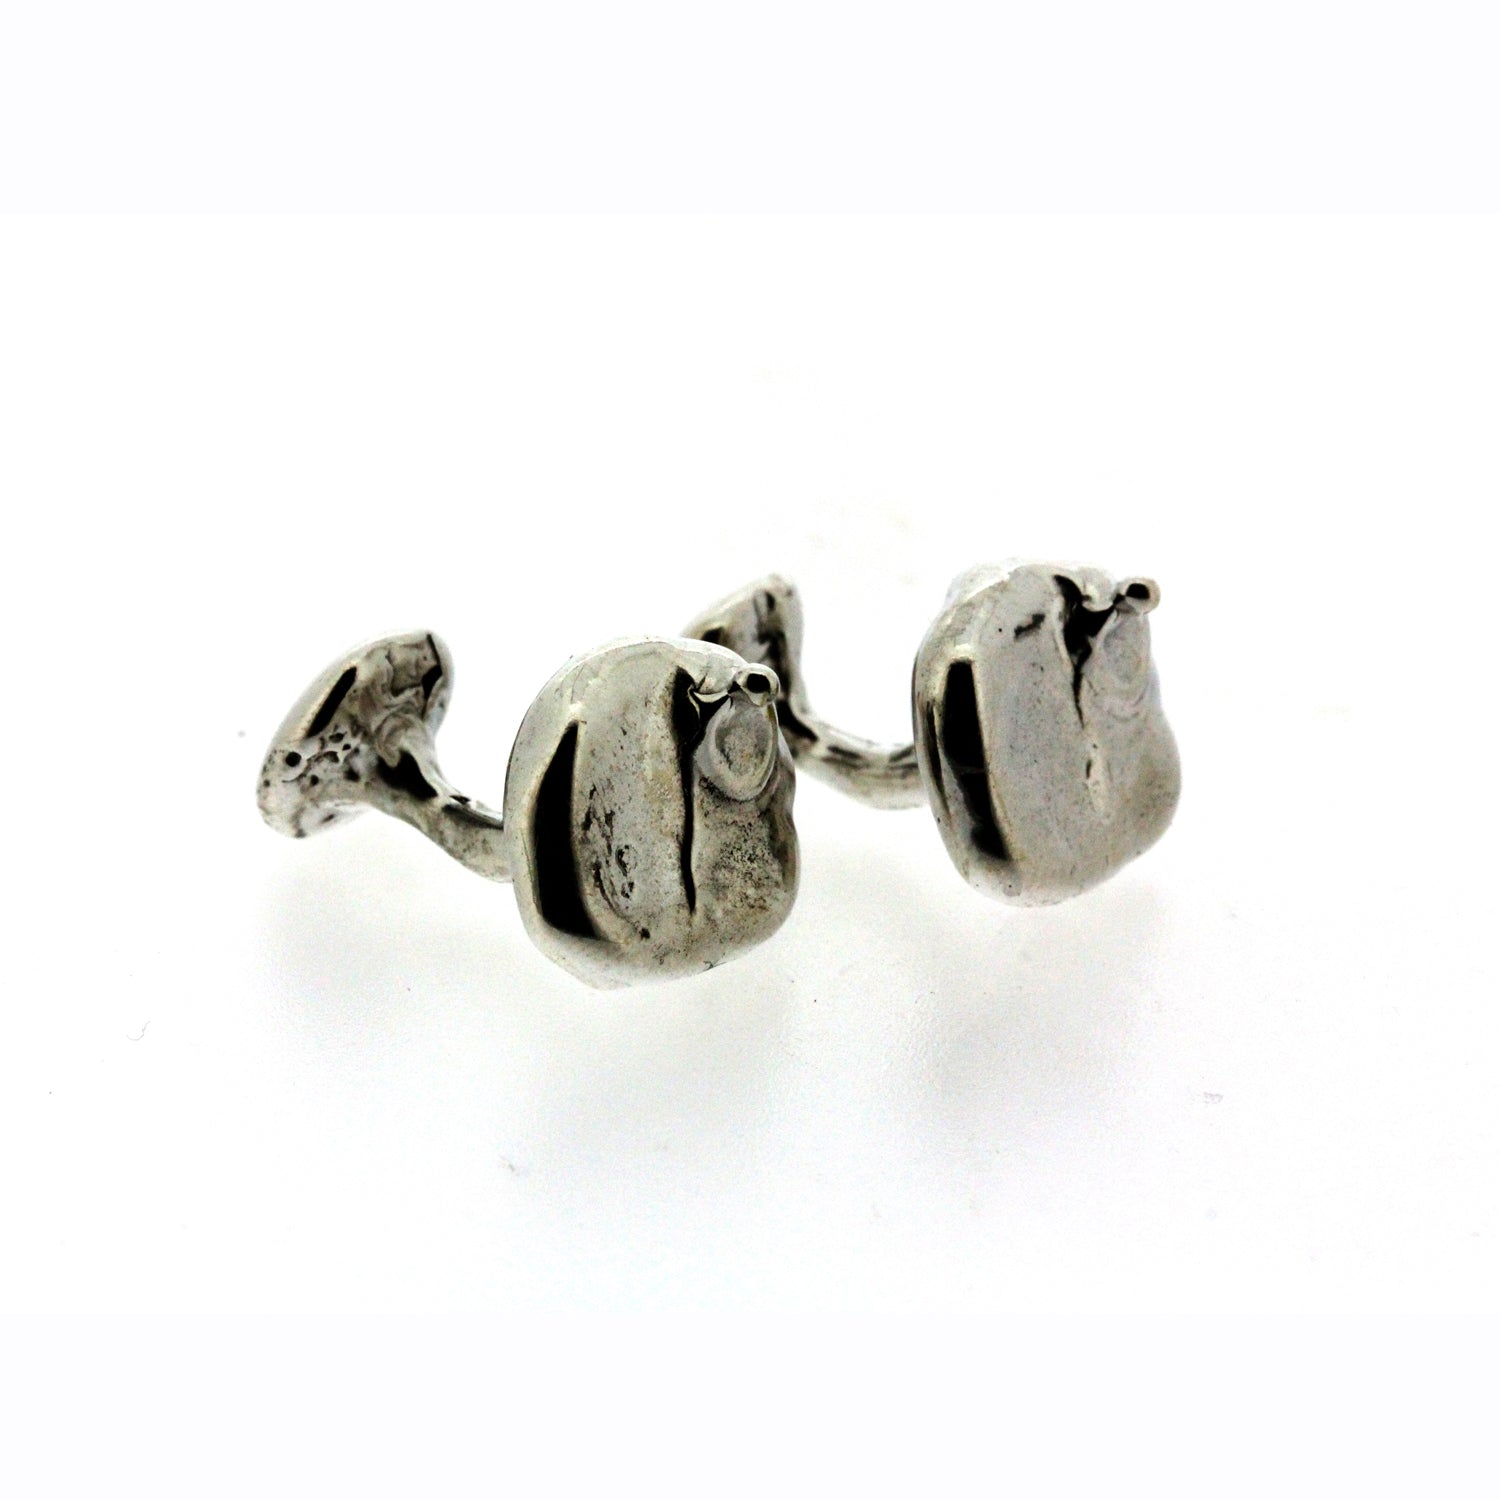 Full view of Henry Cufflinks at an angle.